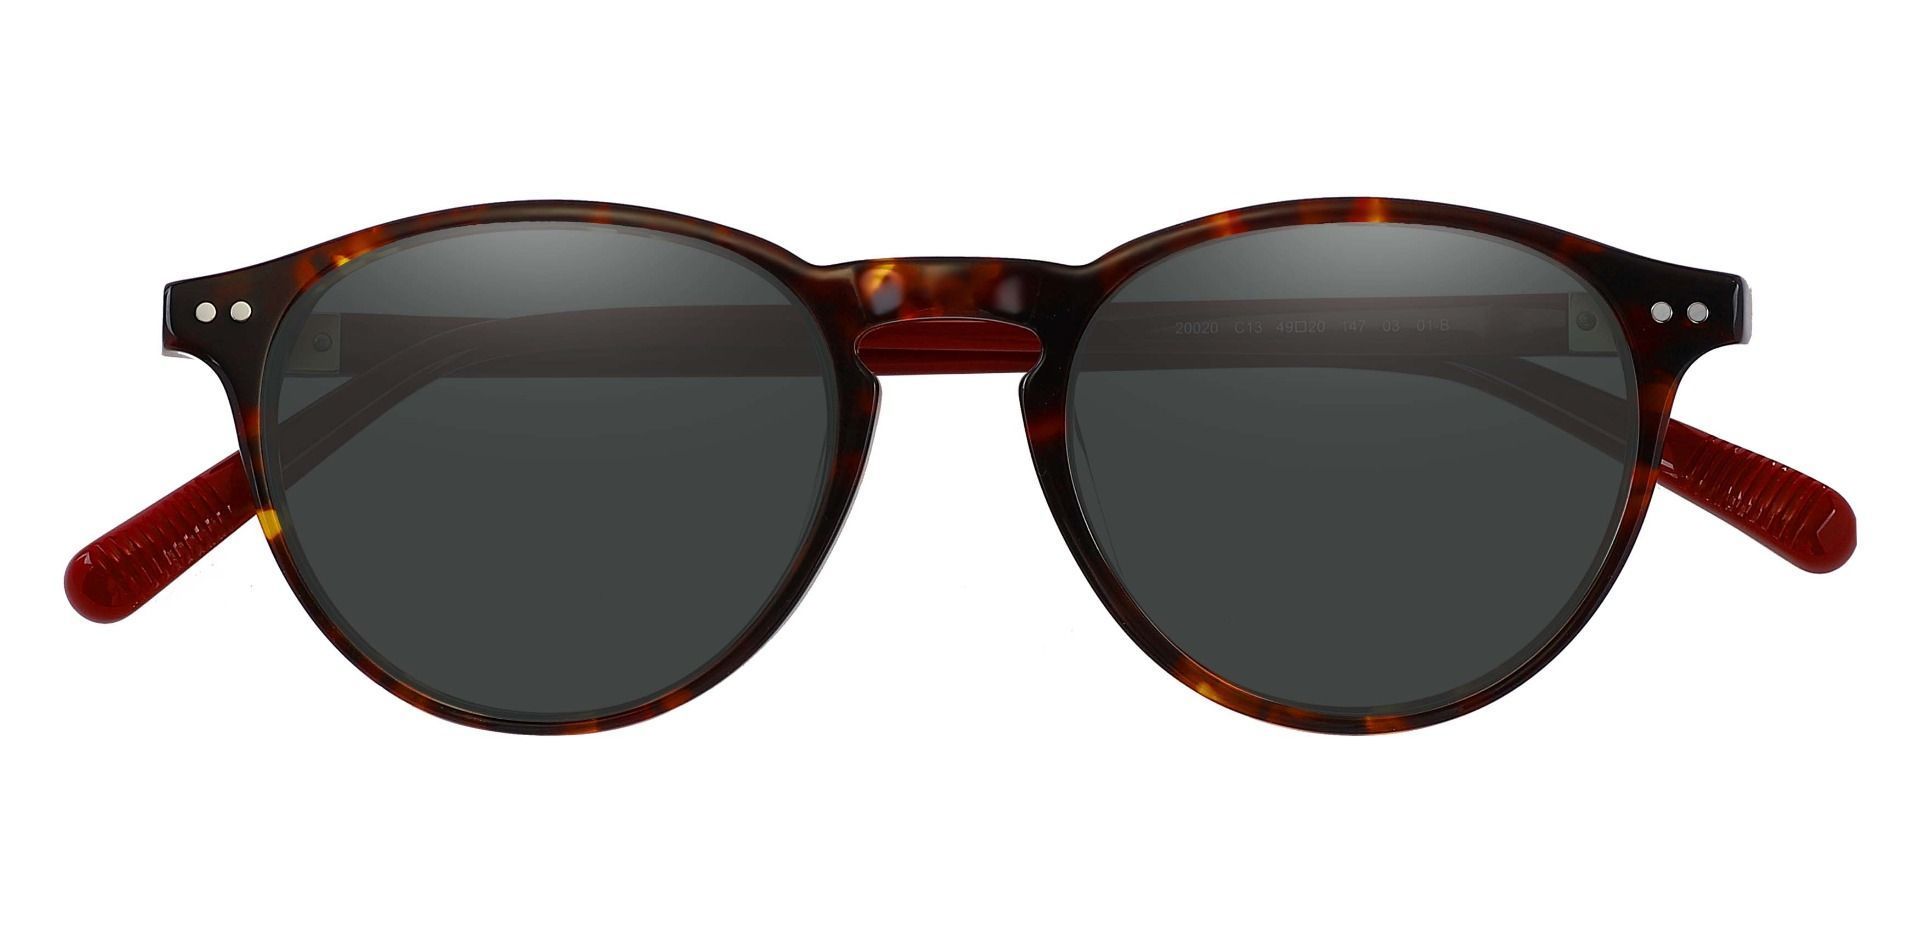 Monarch Oval Non-Rx Sunglasses - Tortoise Frame With Gray Lenses